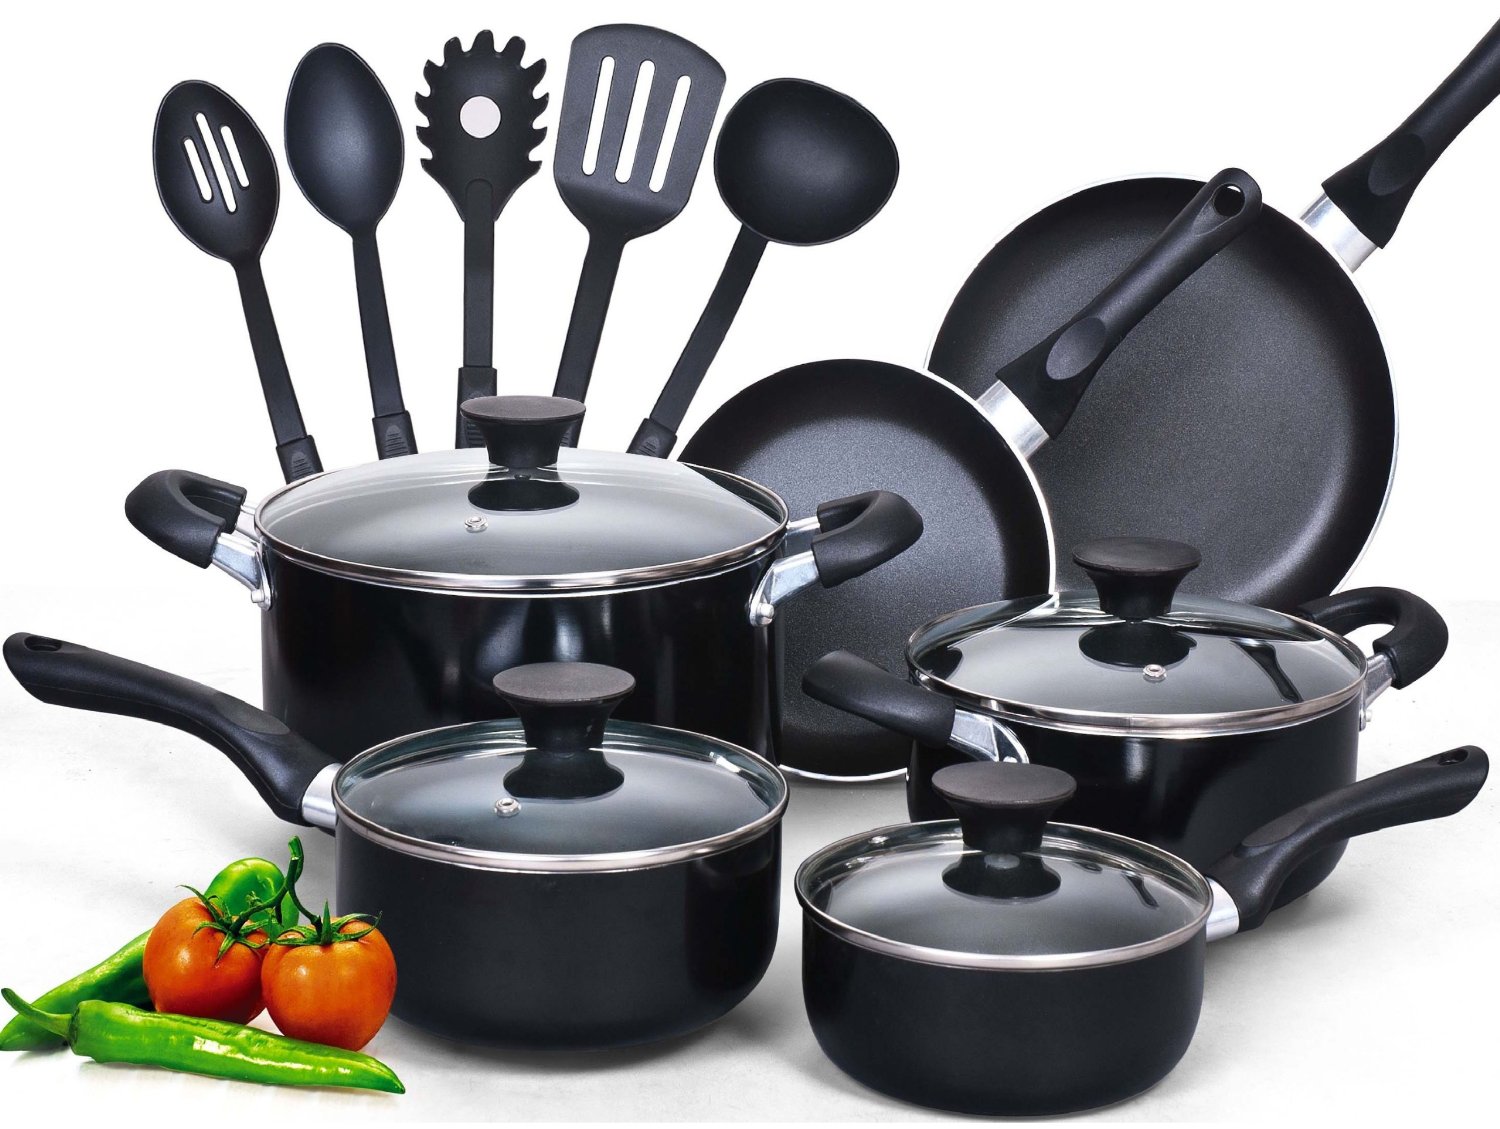 Top 10 Best Cookware Sets Review Top Rated Cookware Sets 2016